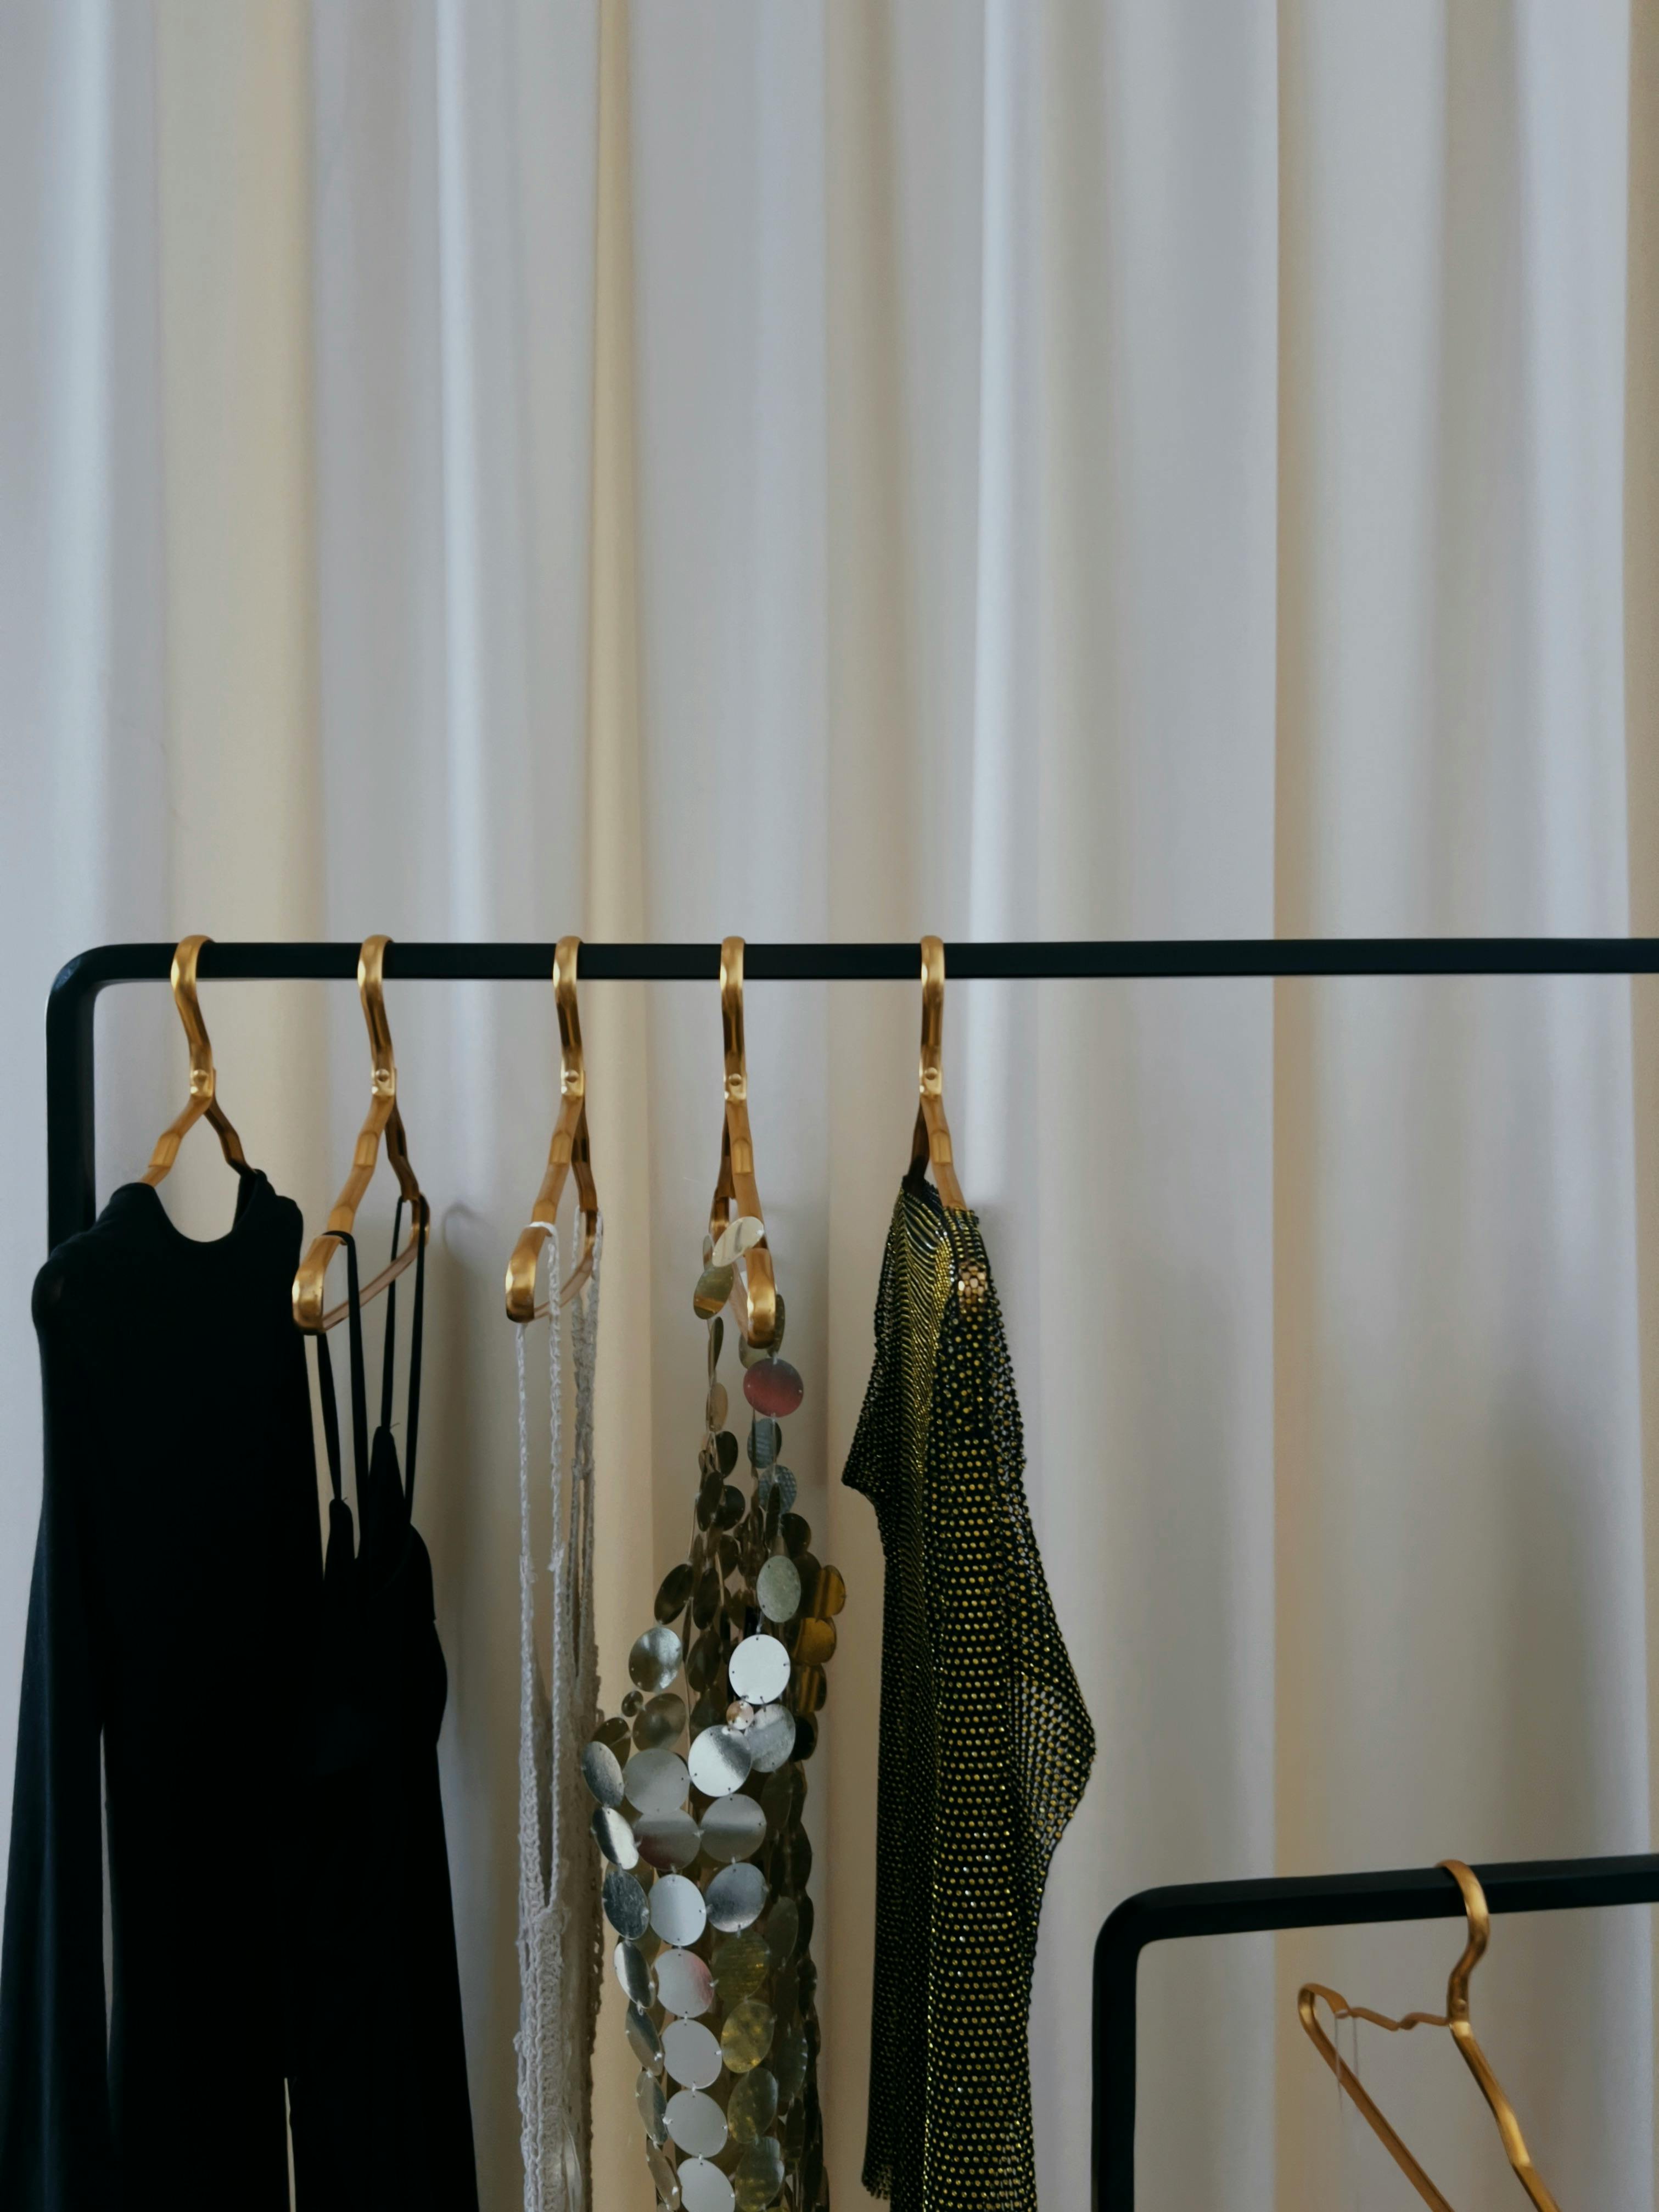 Little black dresses hanging from a pole | Source: Pexels